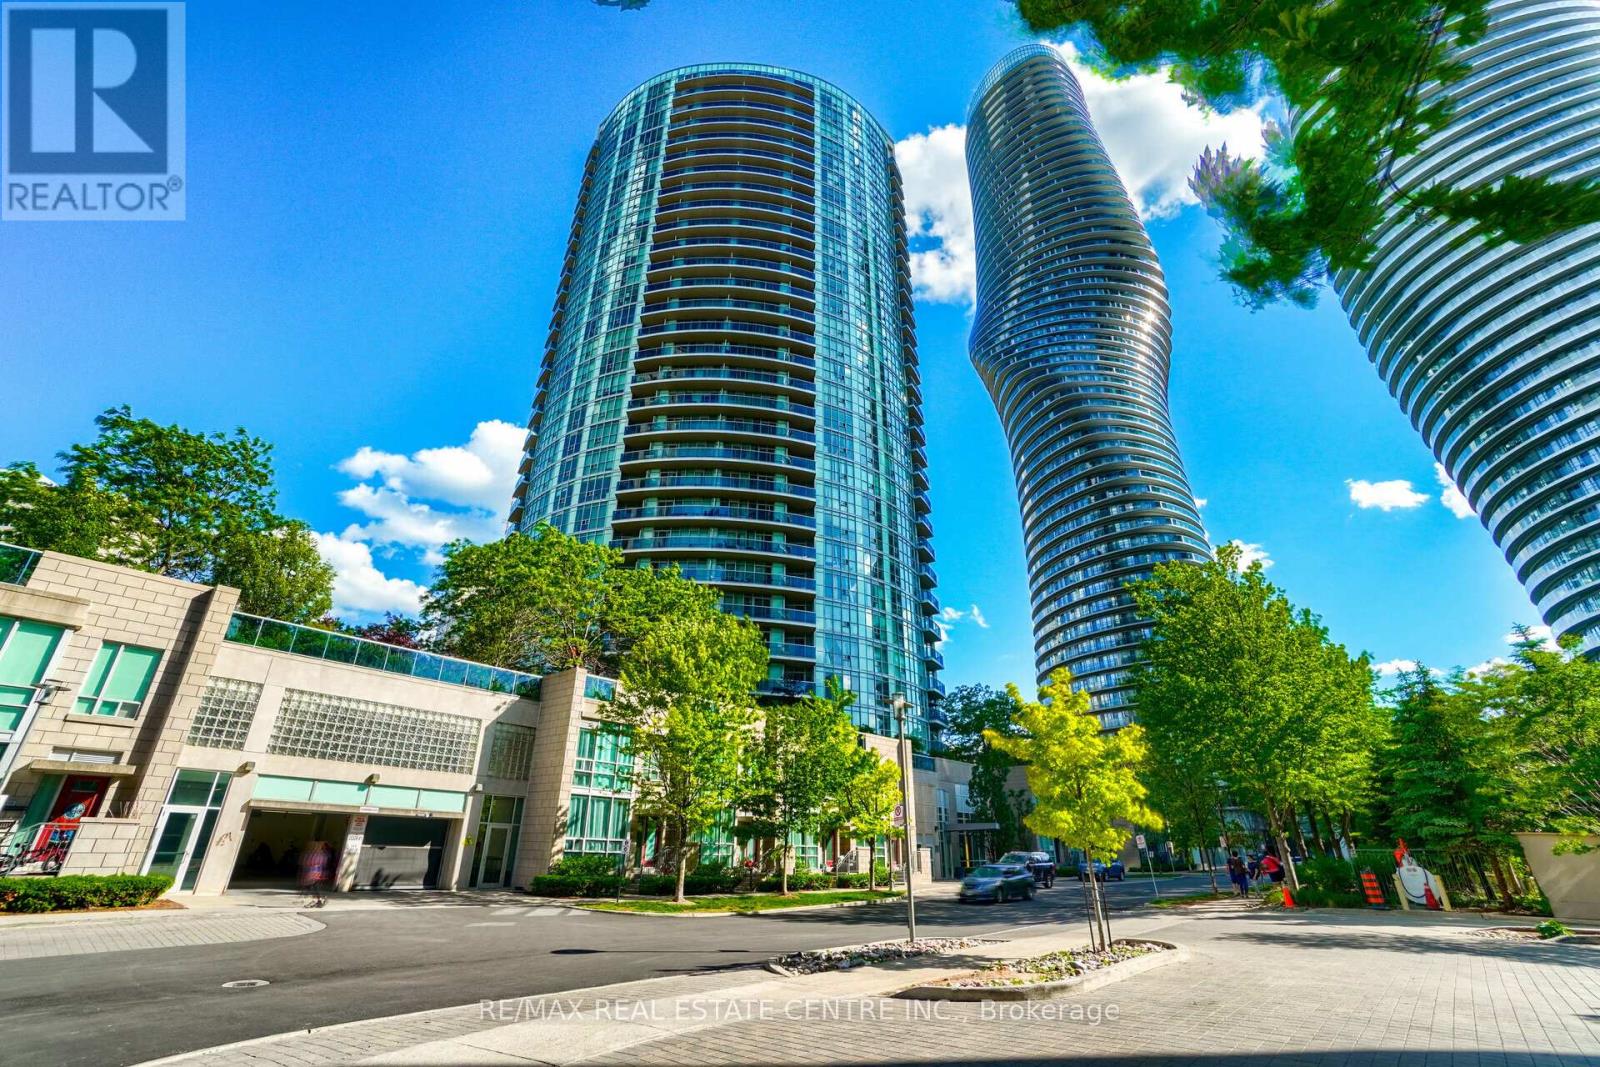 1004 - 70 Absolute Avenue, Mississauga, Ontario  L4Z 0A4 - Photo 1 - W8242454